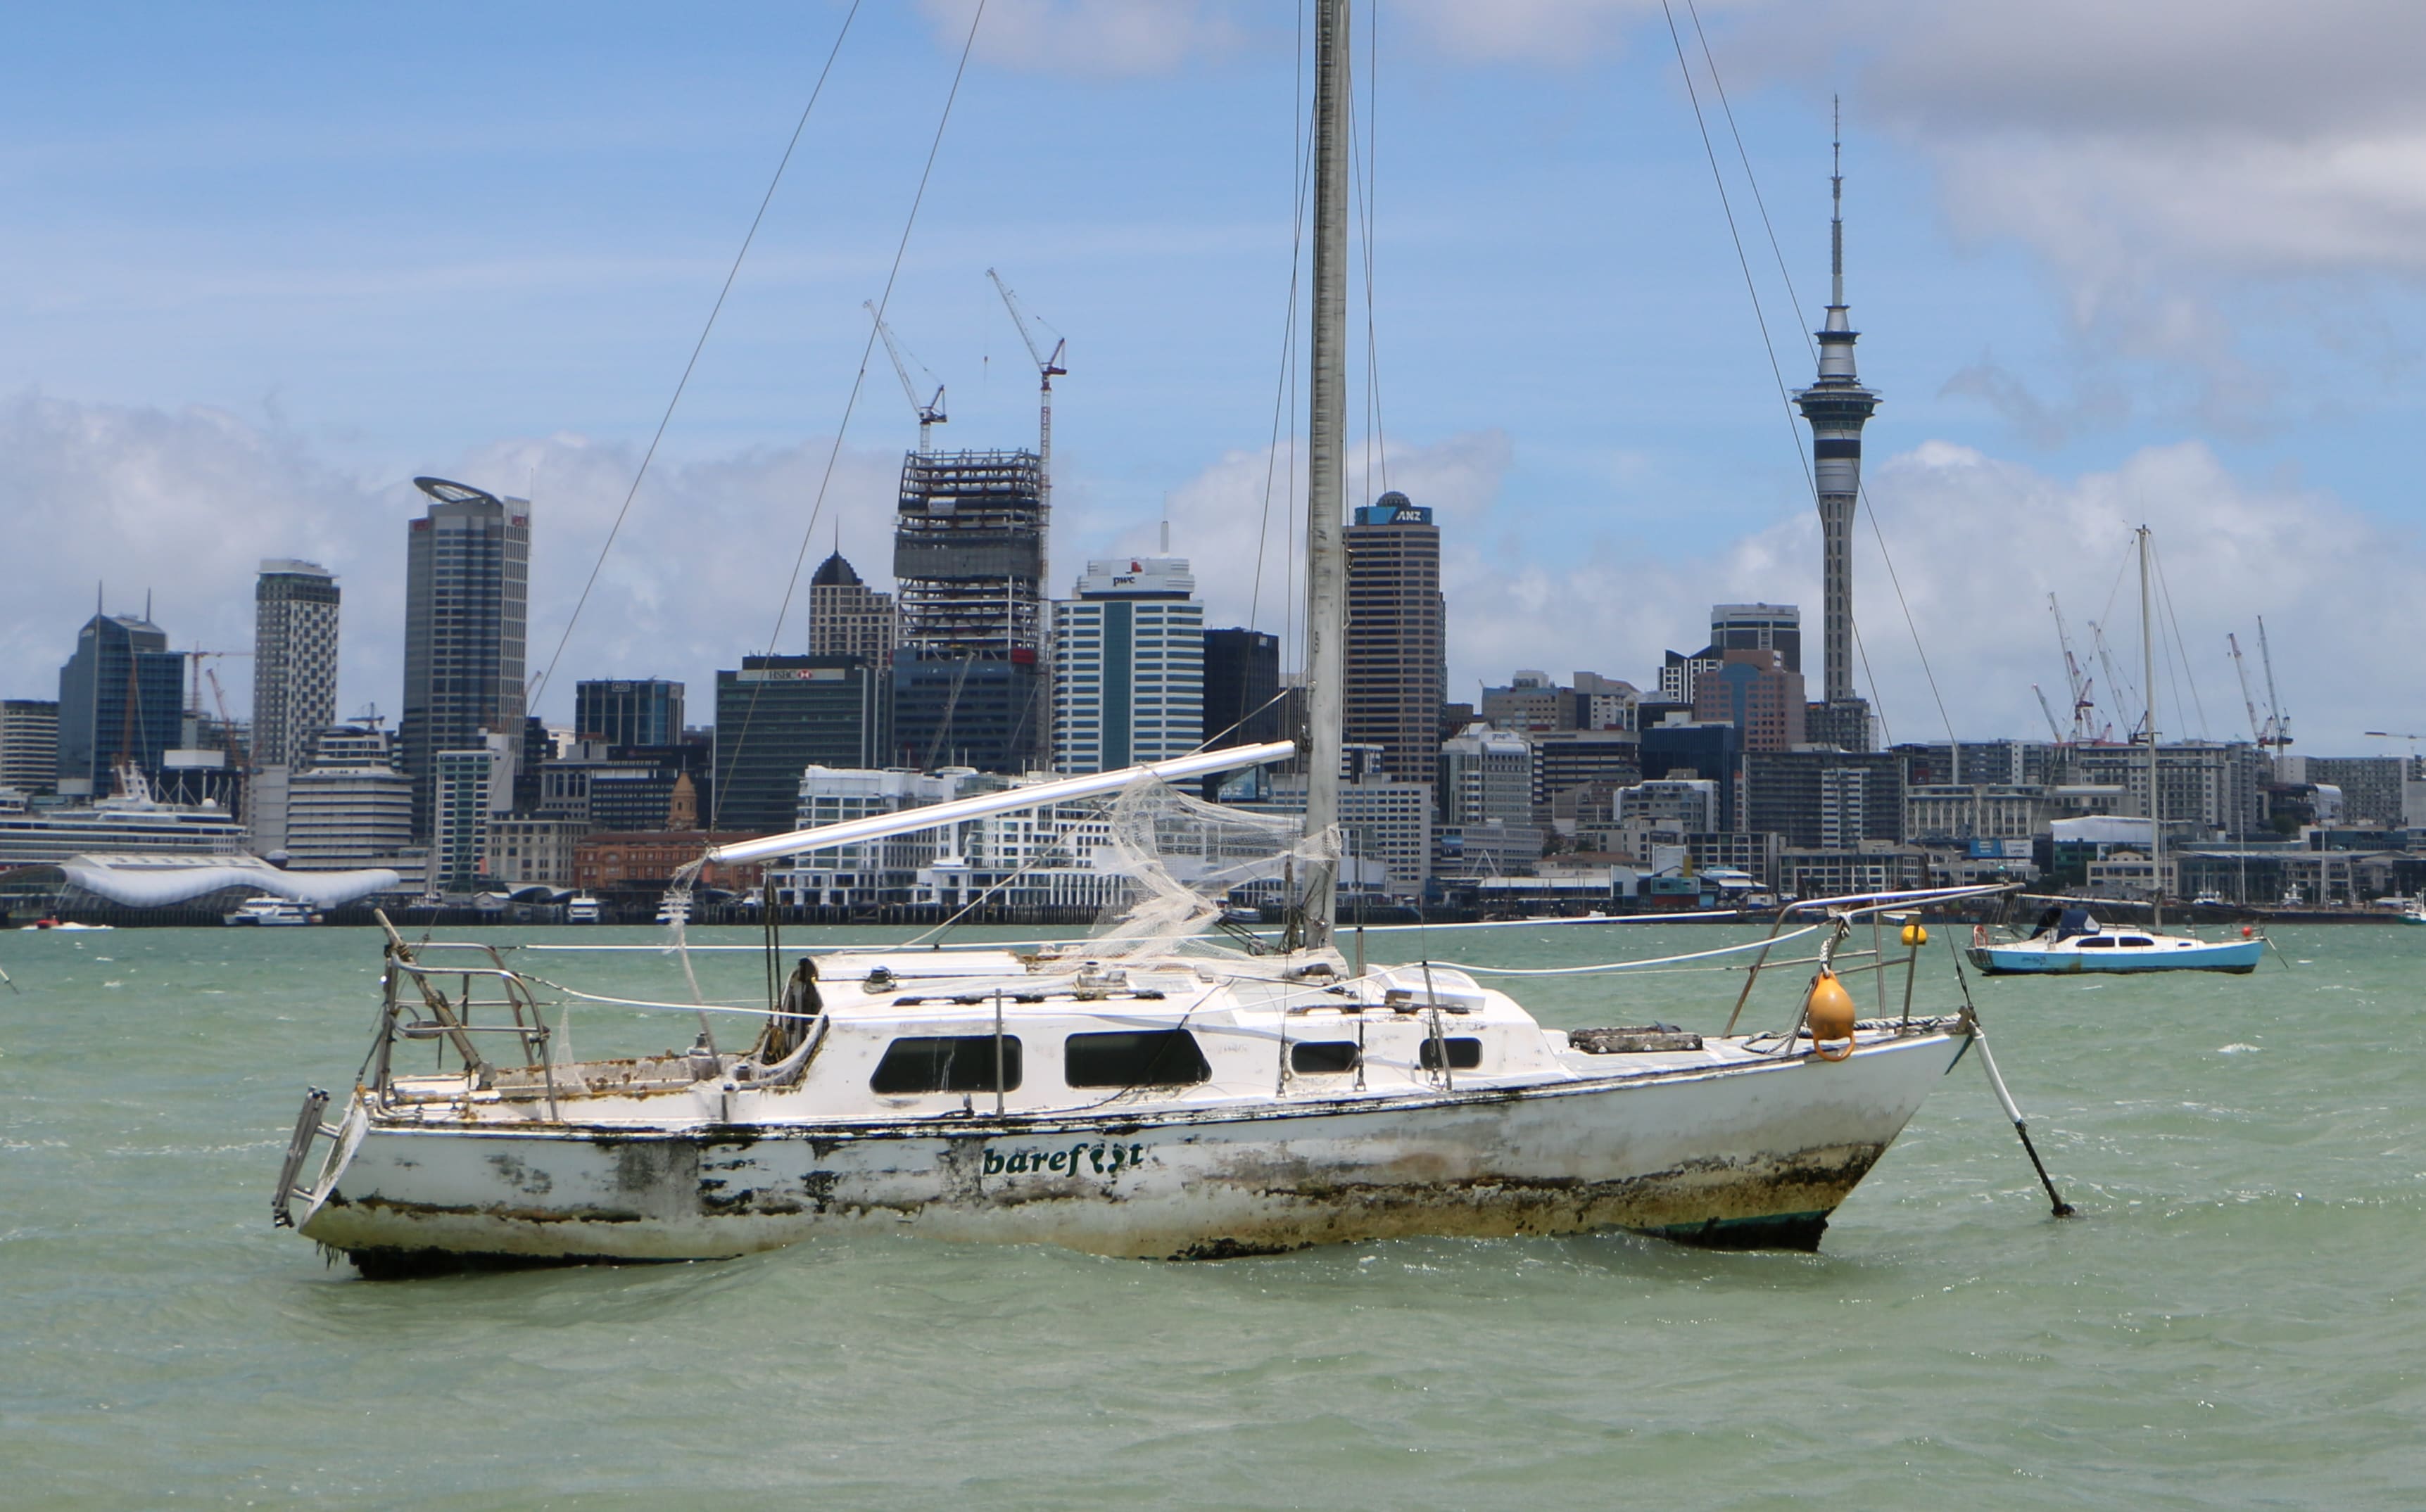 An abandoned boat in the Waitemata harbour